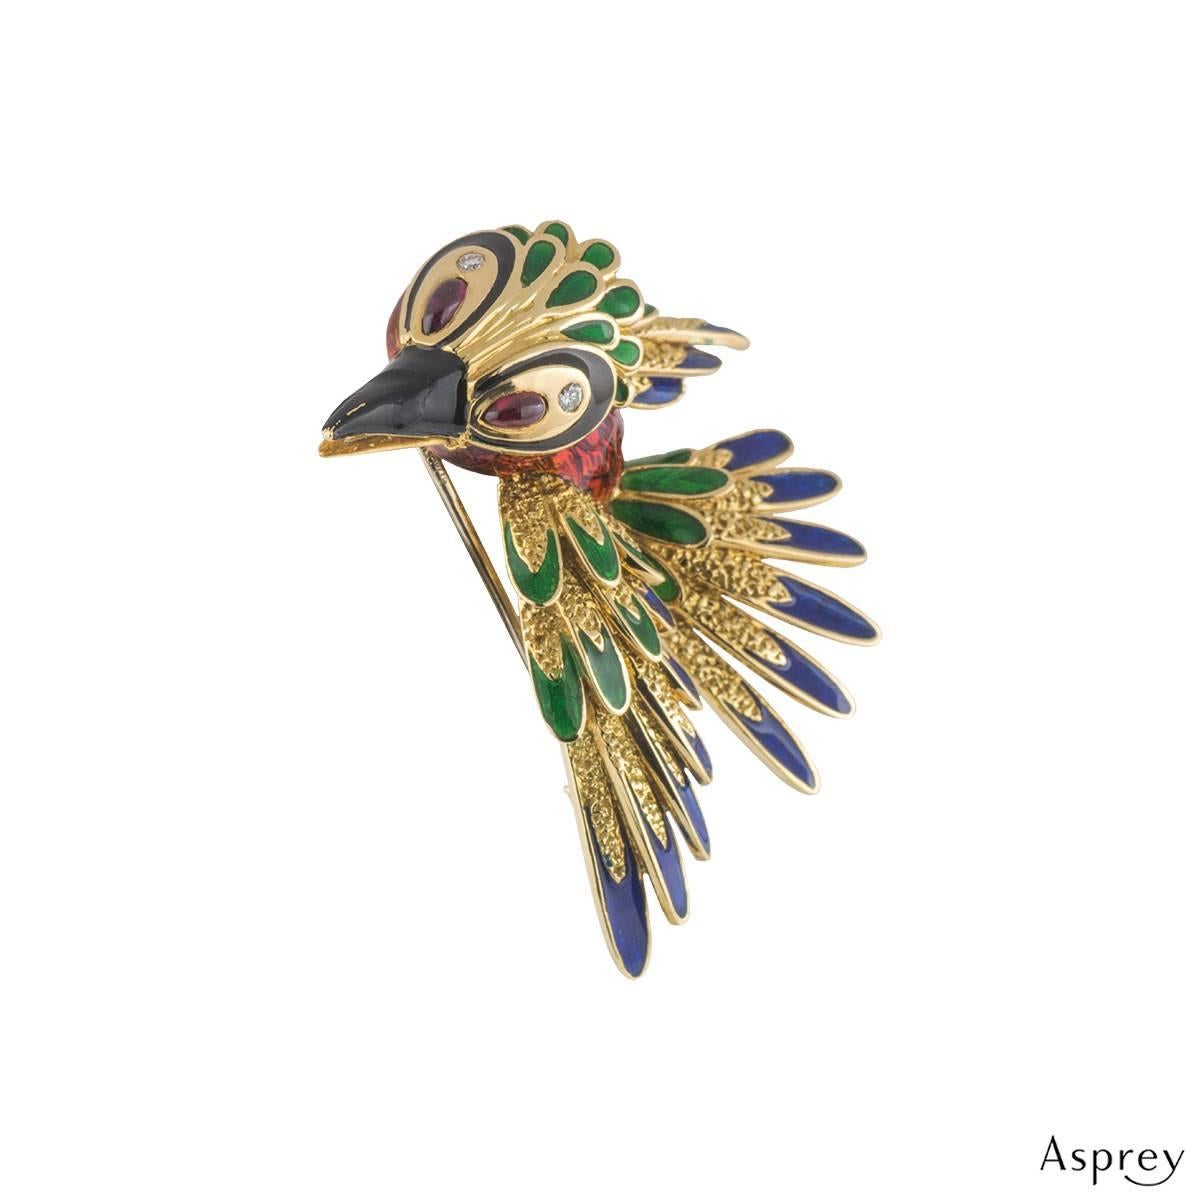 A unique 18k yellow gold Asrey woodpecker brooch. The brooch comprises of a flying woodpecker motif with blue, green, black and red enamel. The eyes have a cabochon cut ruby and round brilliant cut diamonds. The rubies have a total approximate